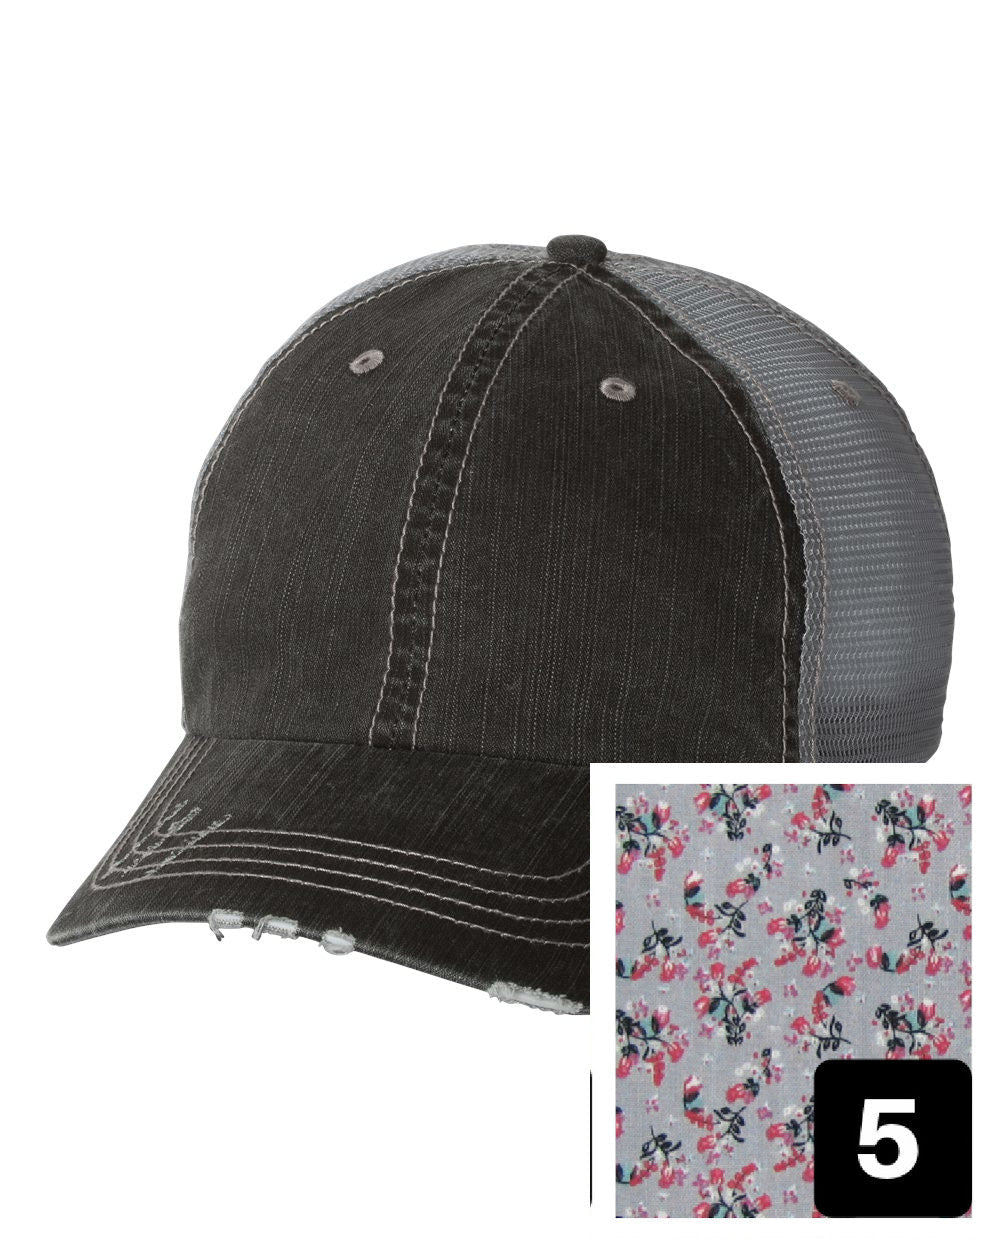 gray distressed trucker hat with purple and pink floral fabric state of Washington